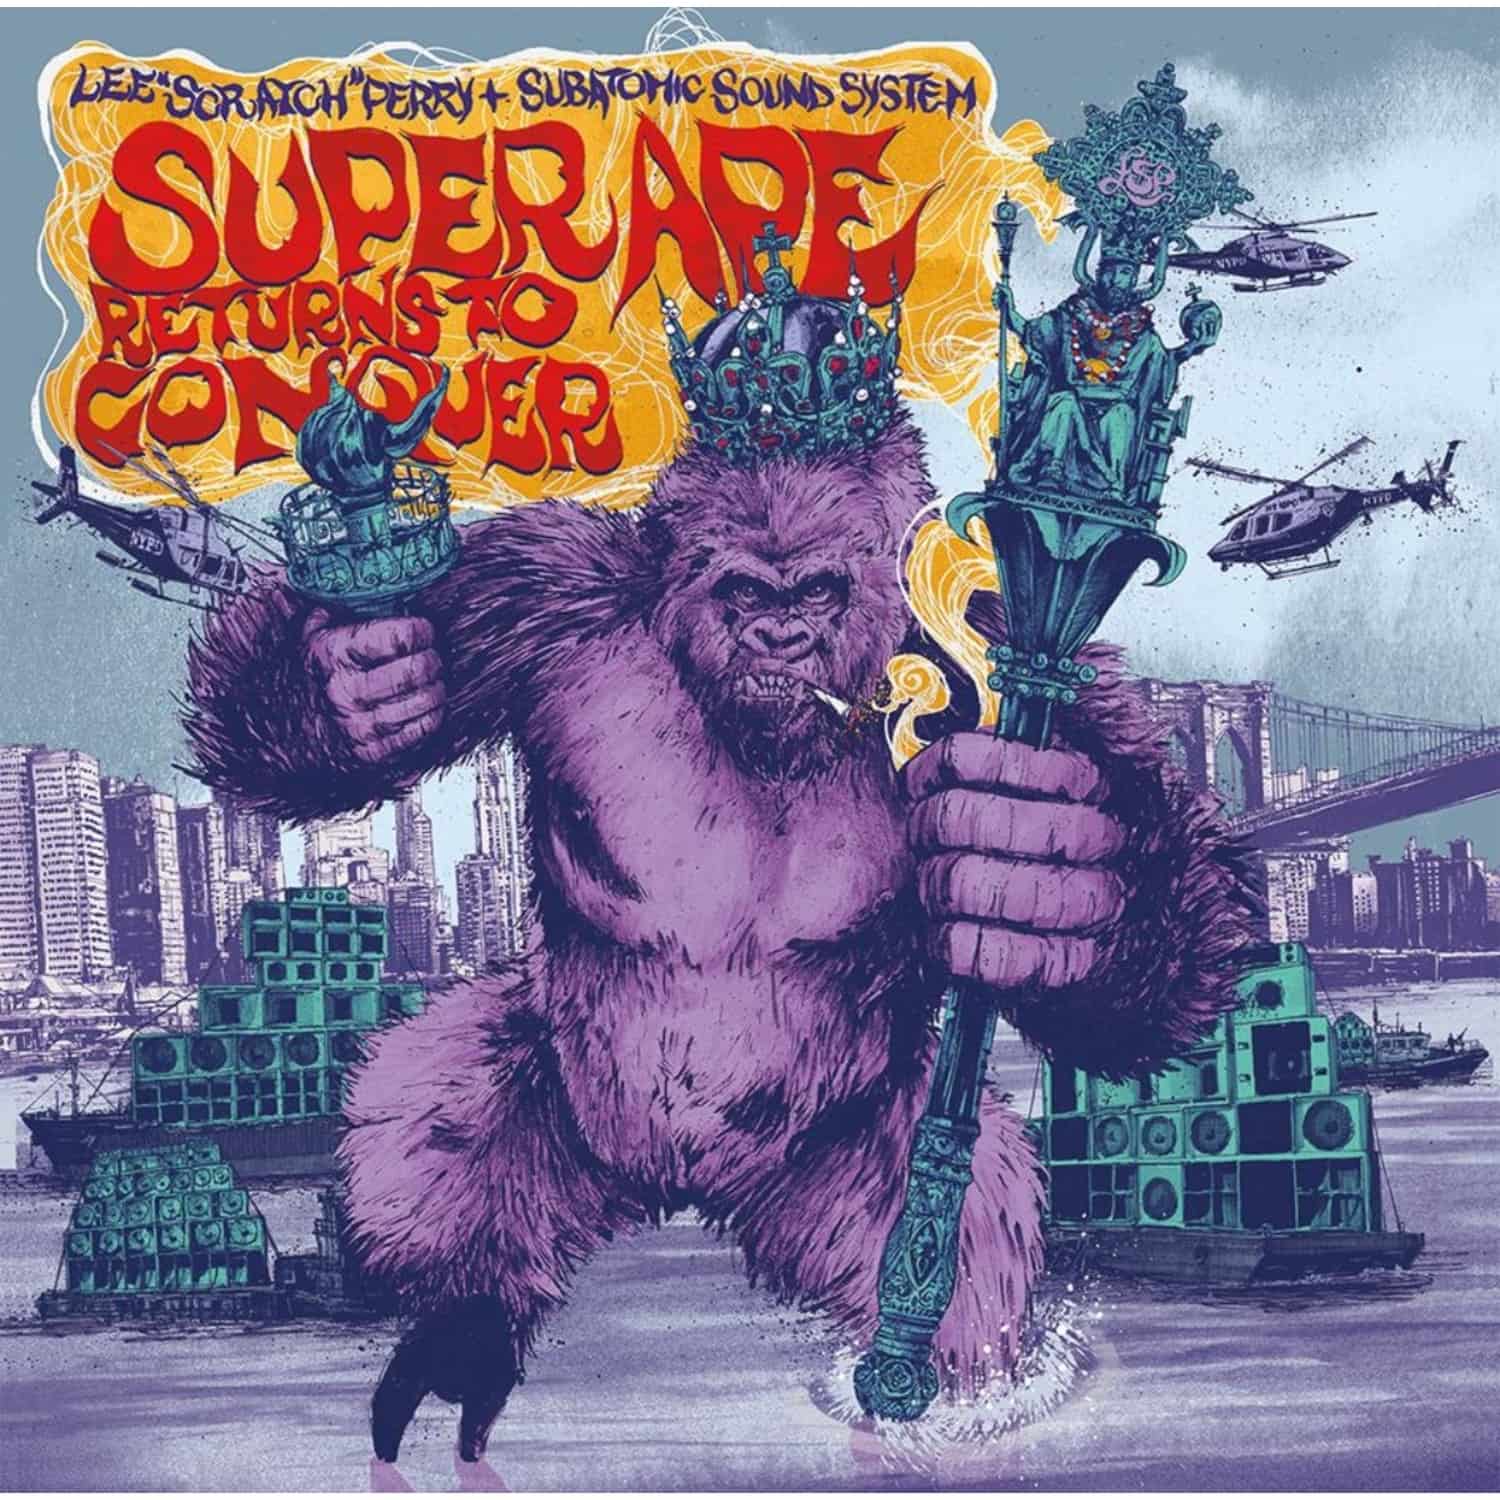 Lee Perry Scratch/Subatomic Sound System - SUPER APE RETURNS TO CONQUER 